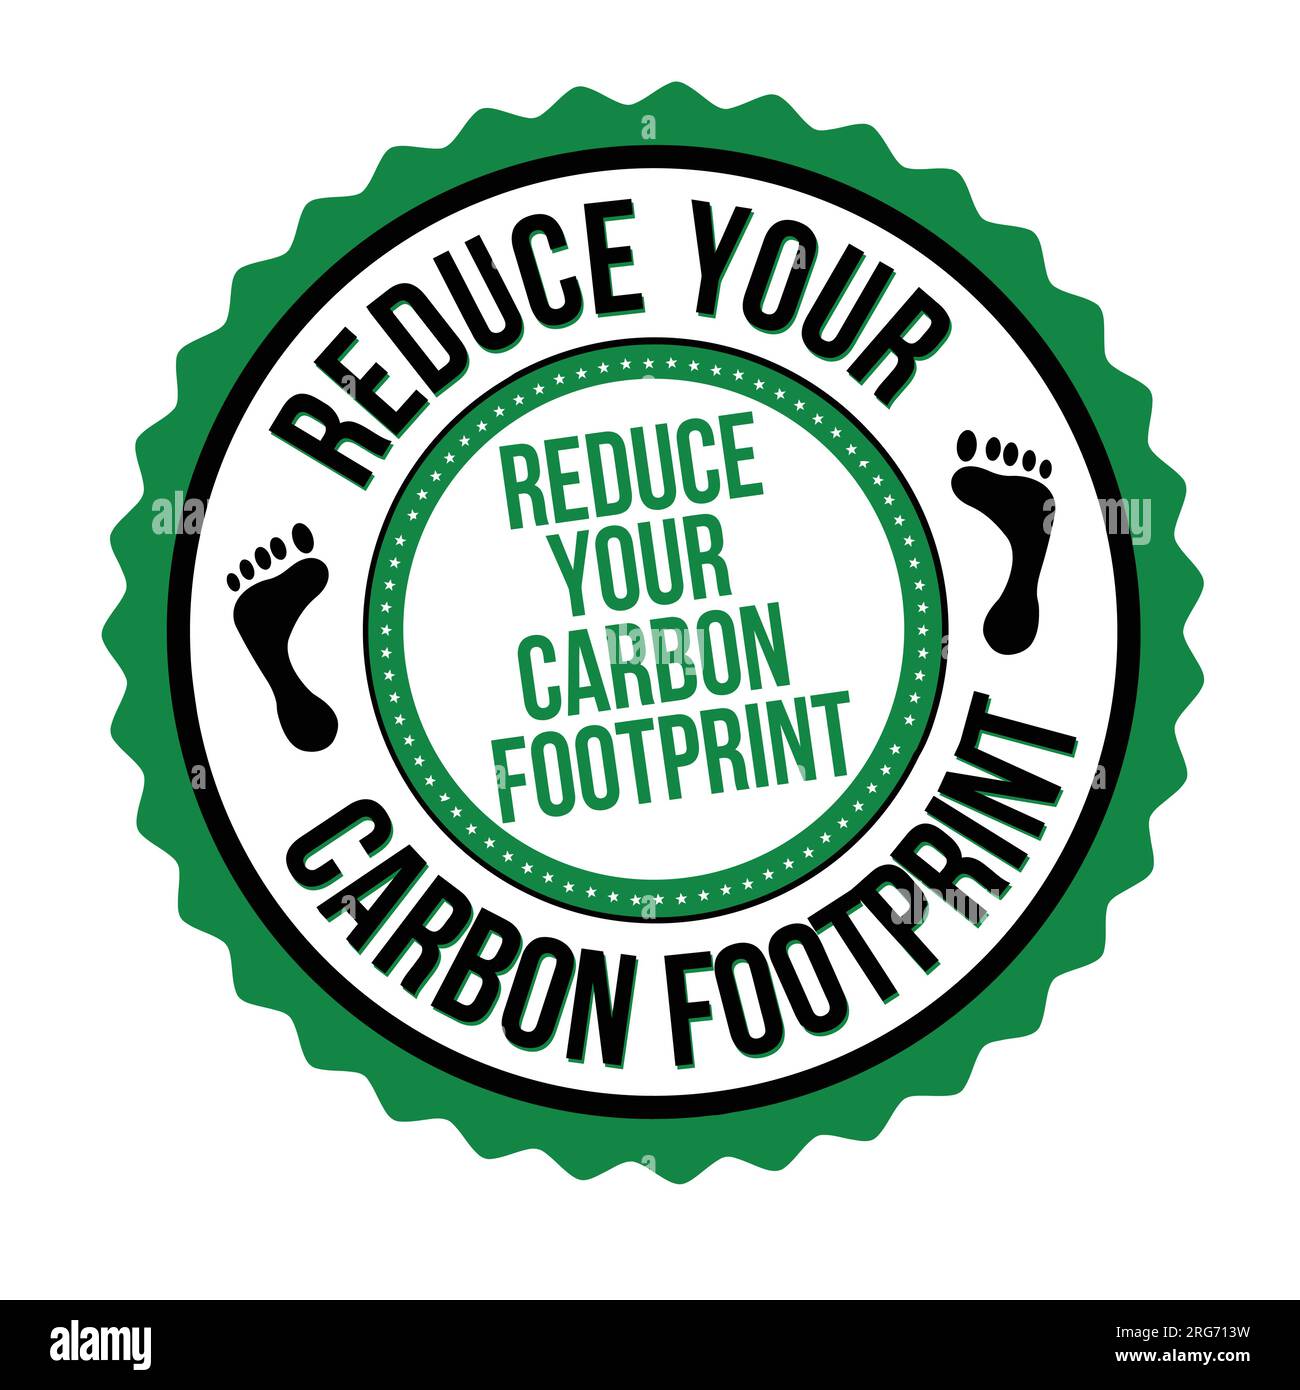 Reduce carbon footprint grunge rubber stamp on white background, vector illustration Stock Vector